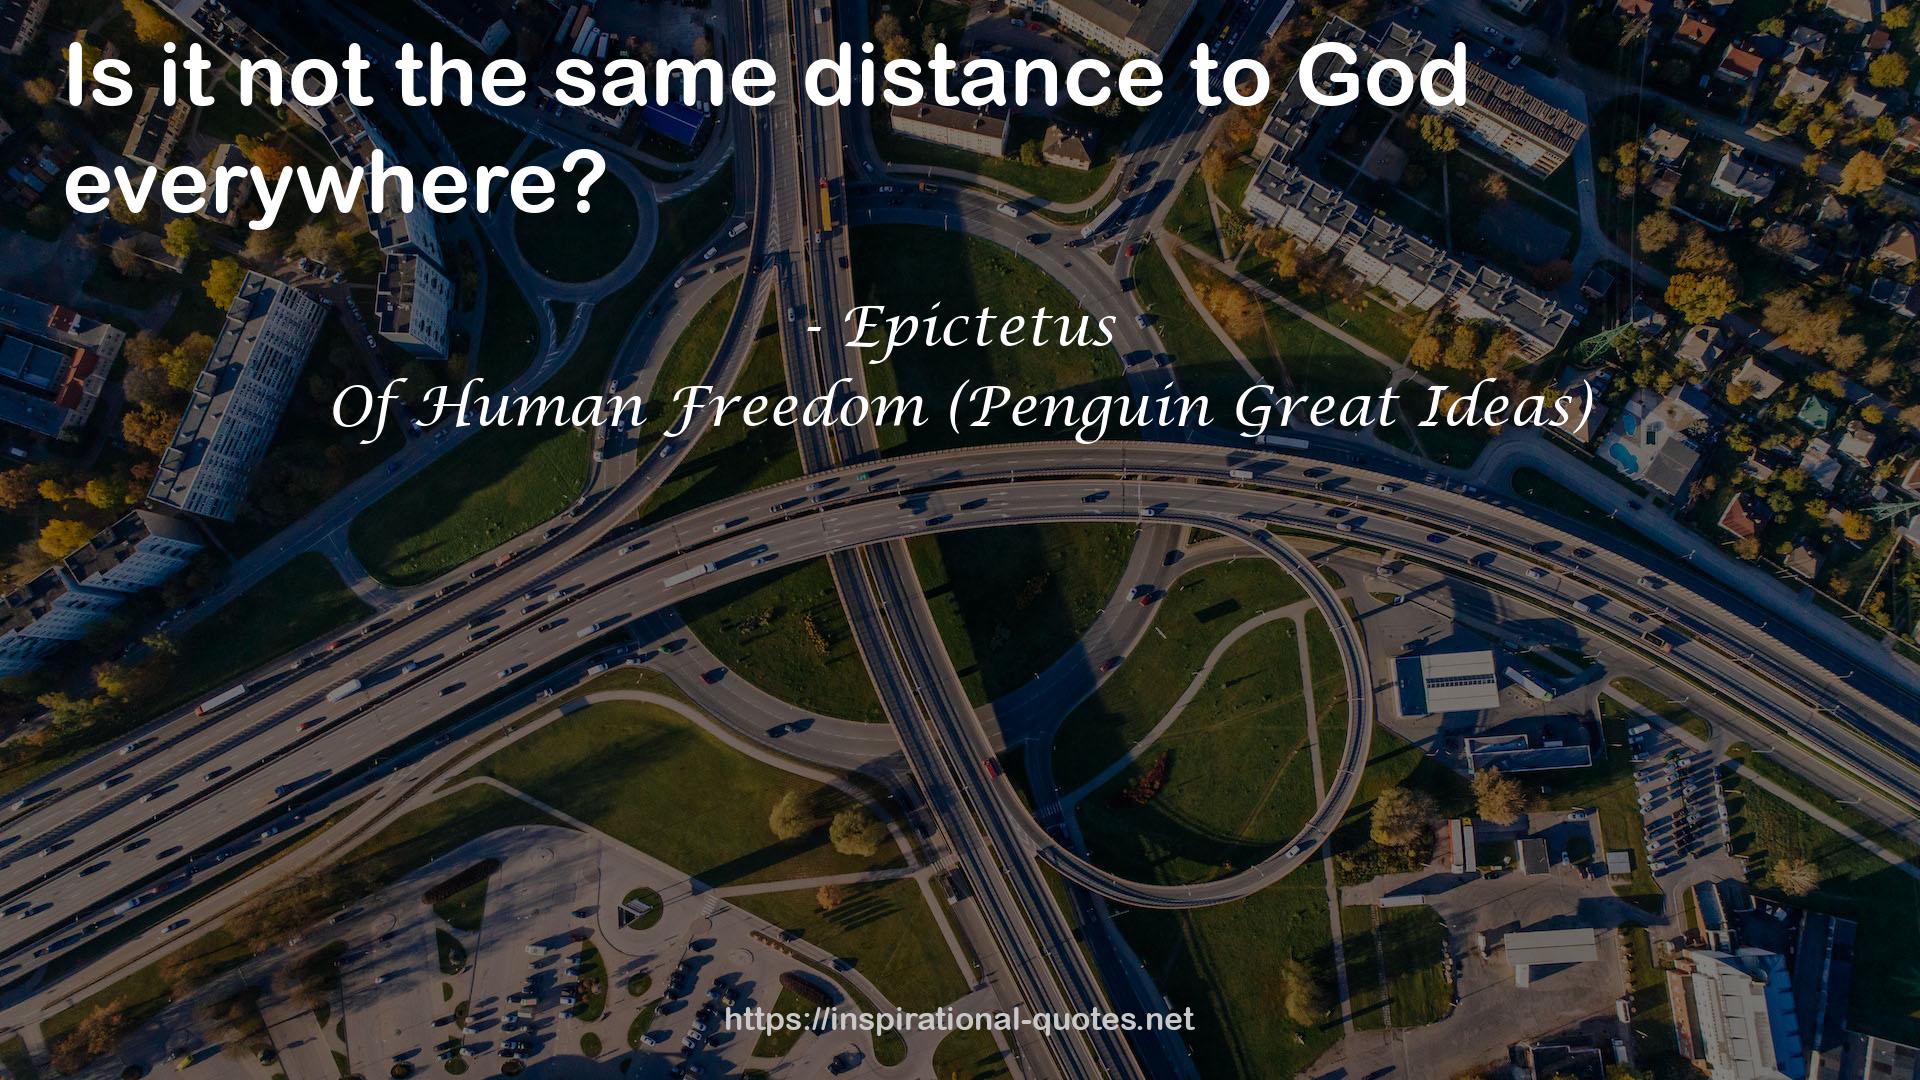 Of Human Freedom (Penguin Great Ideas) QUOTES